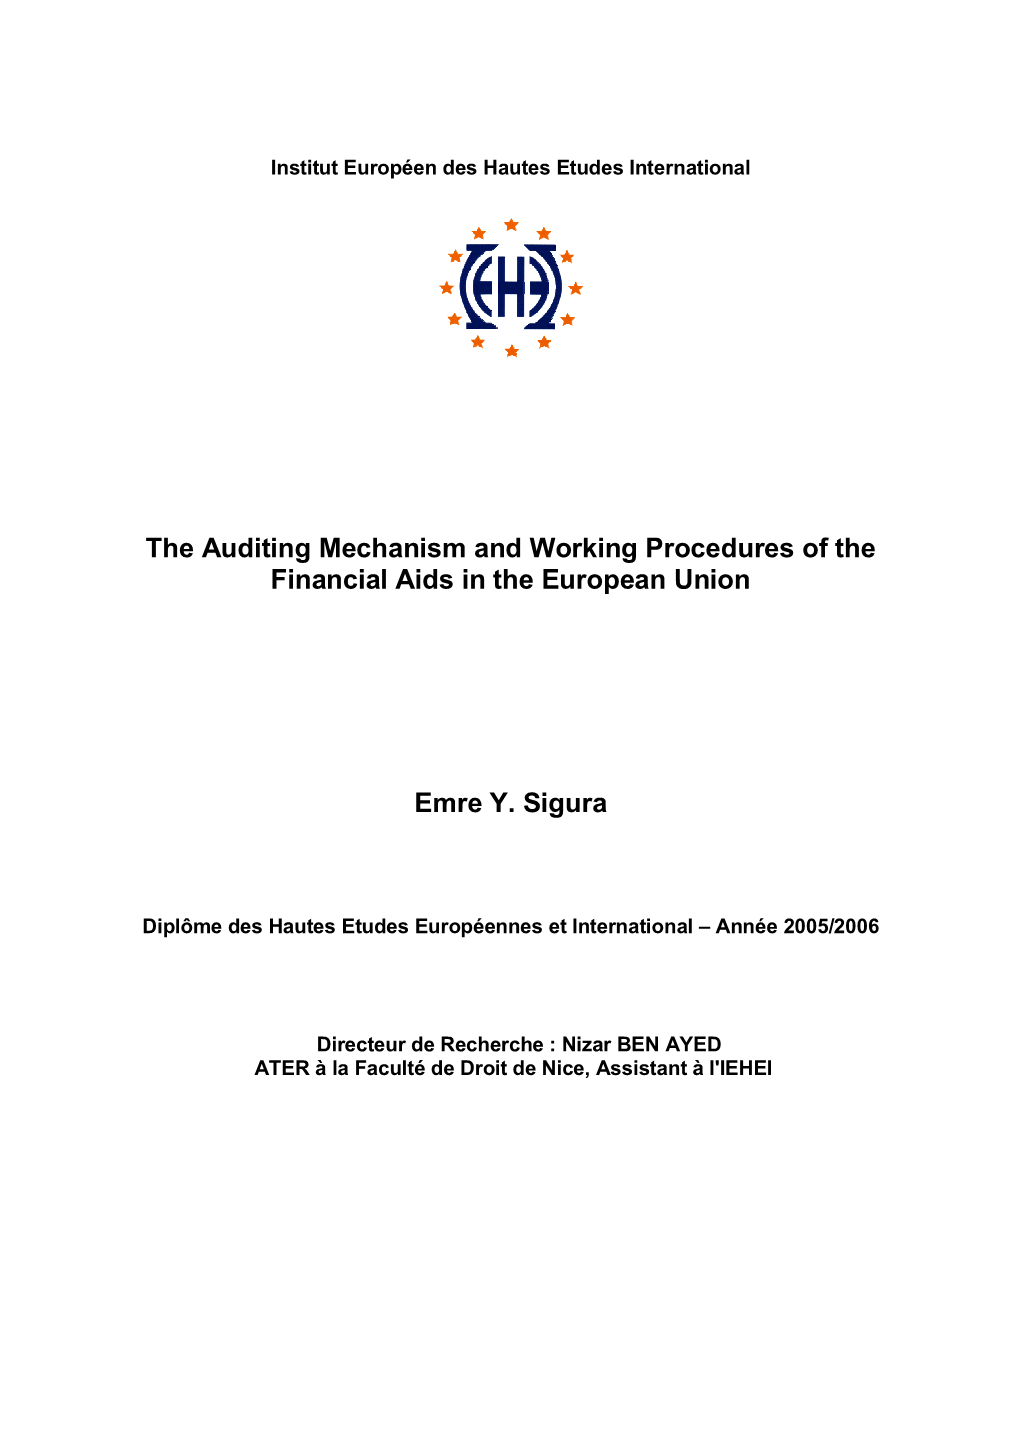 The Auditing Mechanism and Working Procedures of the Financial Aids in the European Union